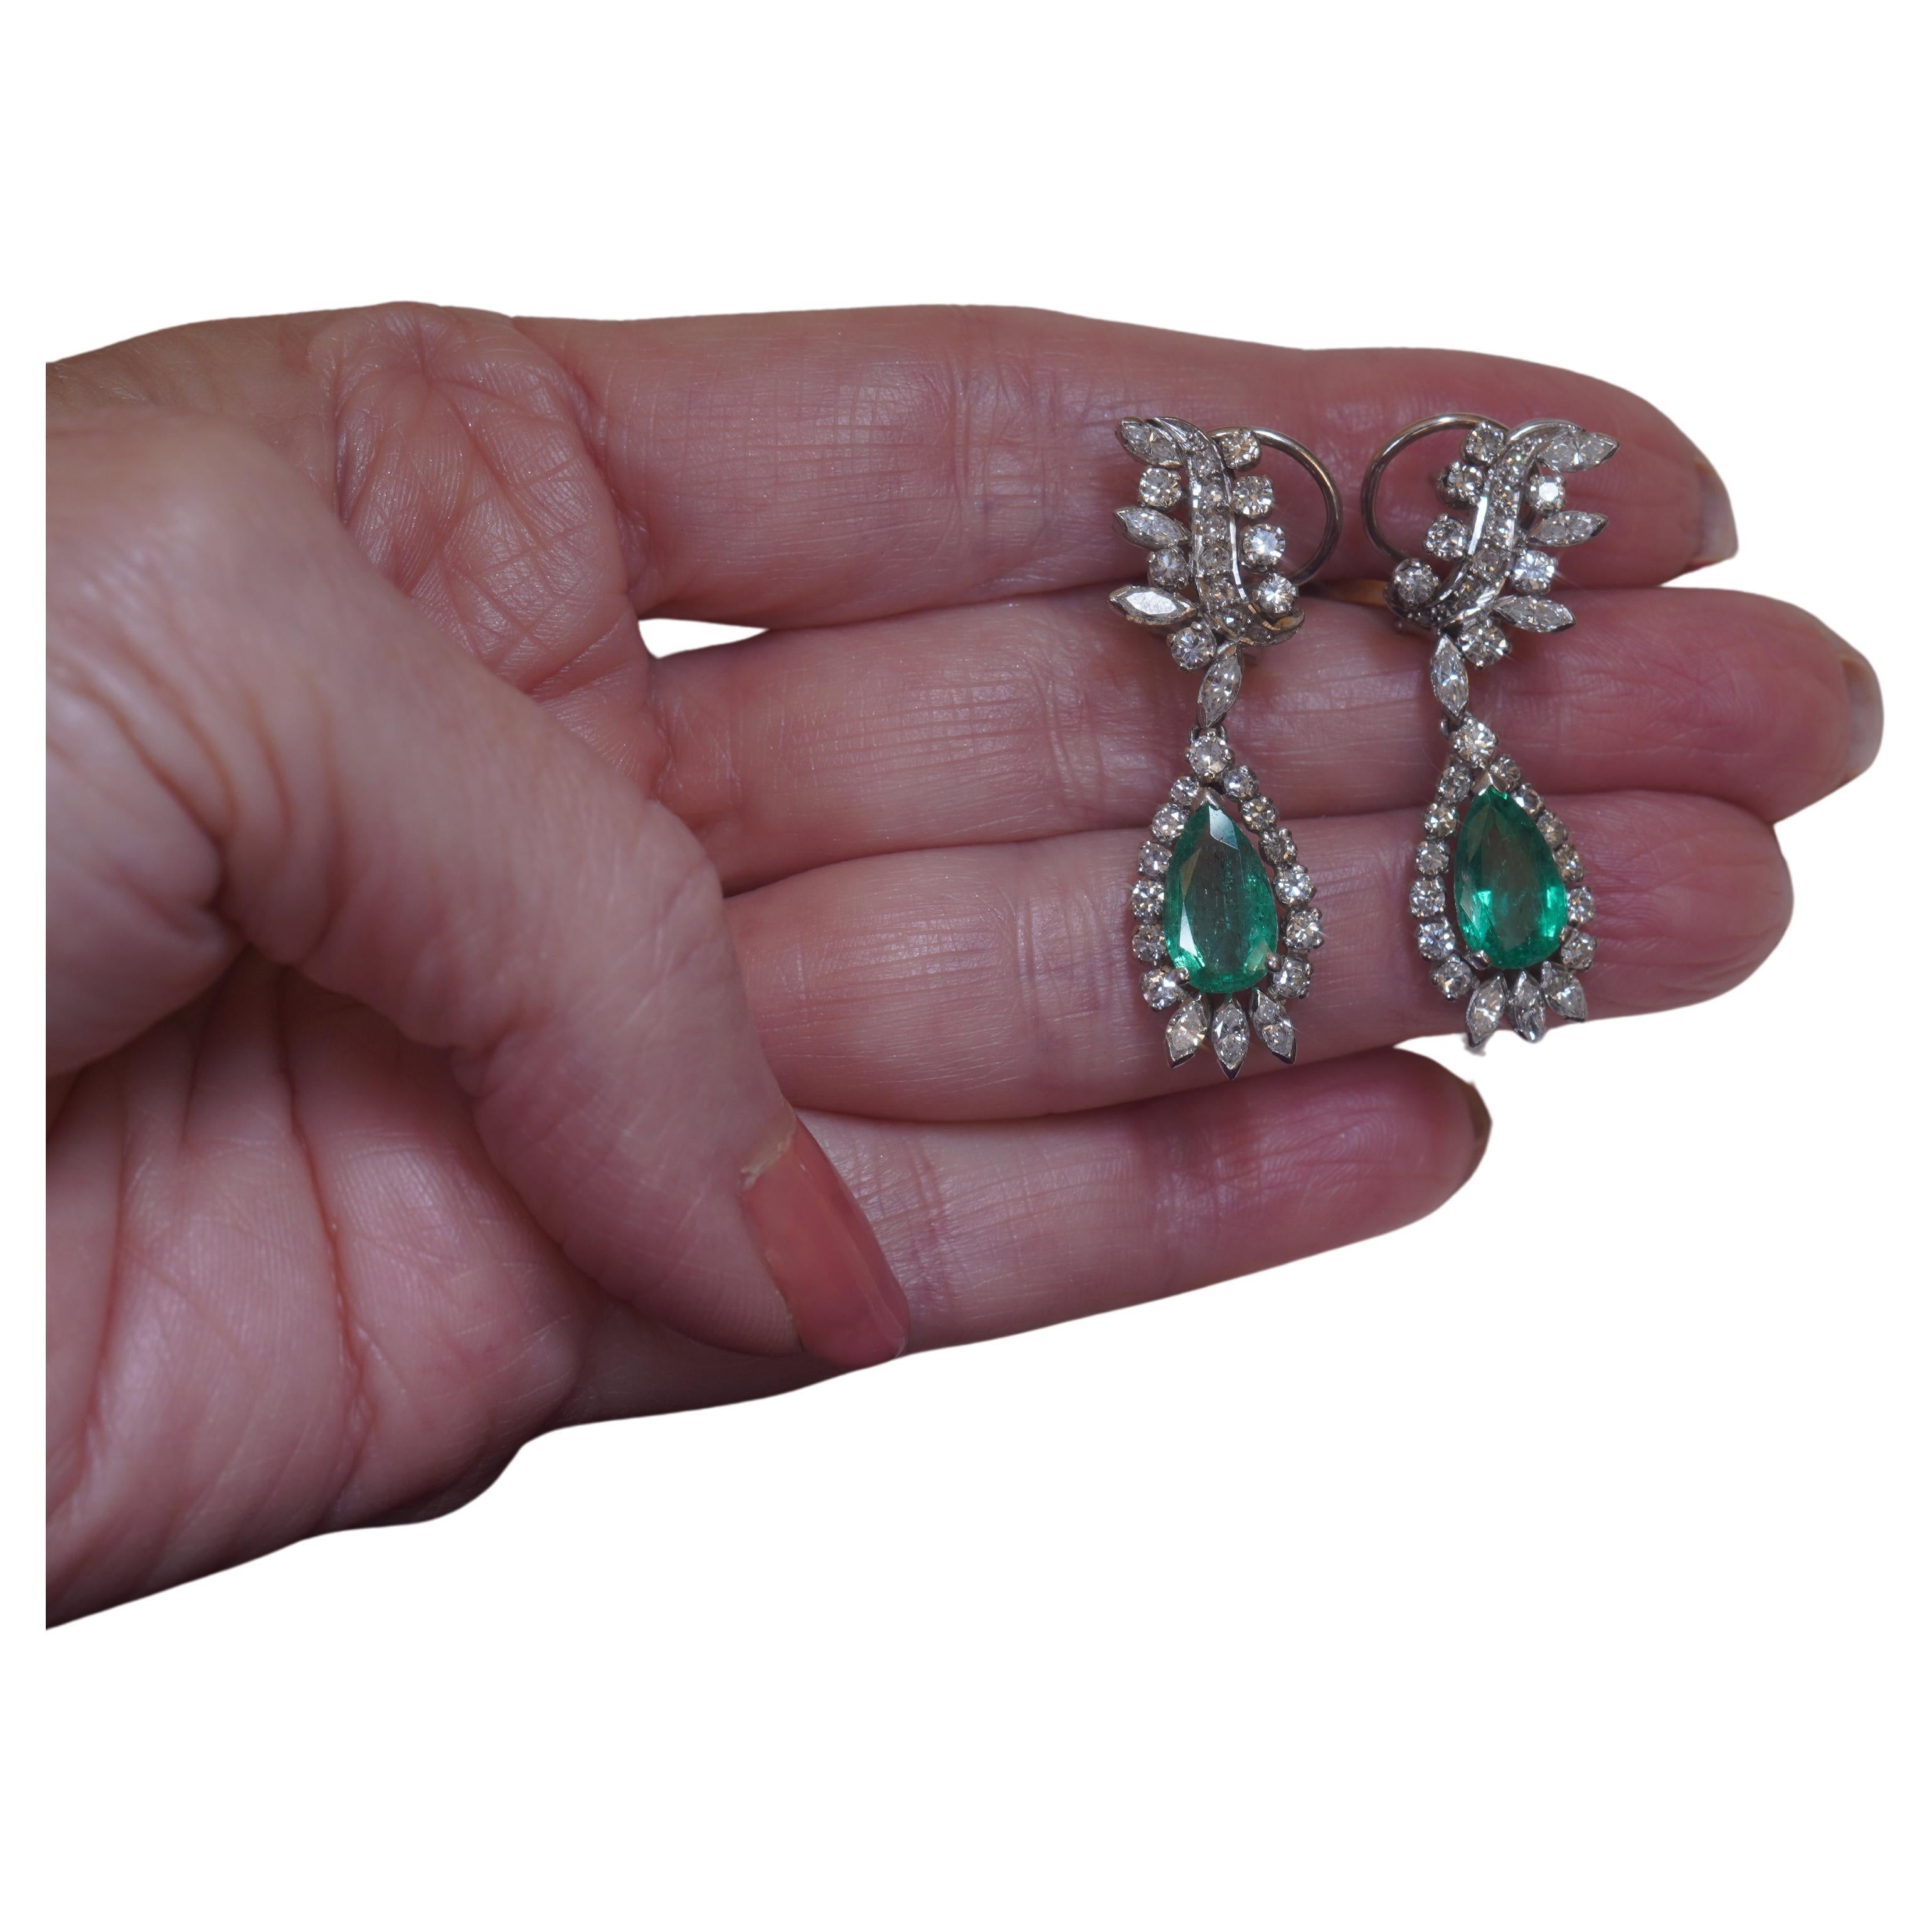 Old South Jewels proudly presents...LUXURY.   ANTIQUE GIA CERTIFIED 7.86 CARAT COLUMBIAN EMERALDS & DIAMOND PLATNUM EARRINGS & BOX!   AAA VIVID GREEN TRANSPARENT COLOMBIAN EMERALDS ARE CROWNED WITH 4.18 CARATS OF SPARKLING WITE DIAMONDS.  FINE